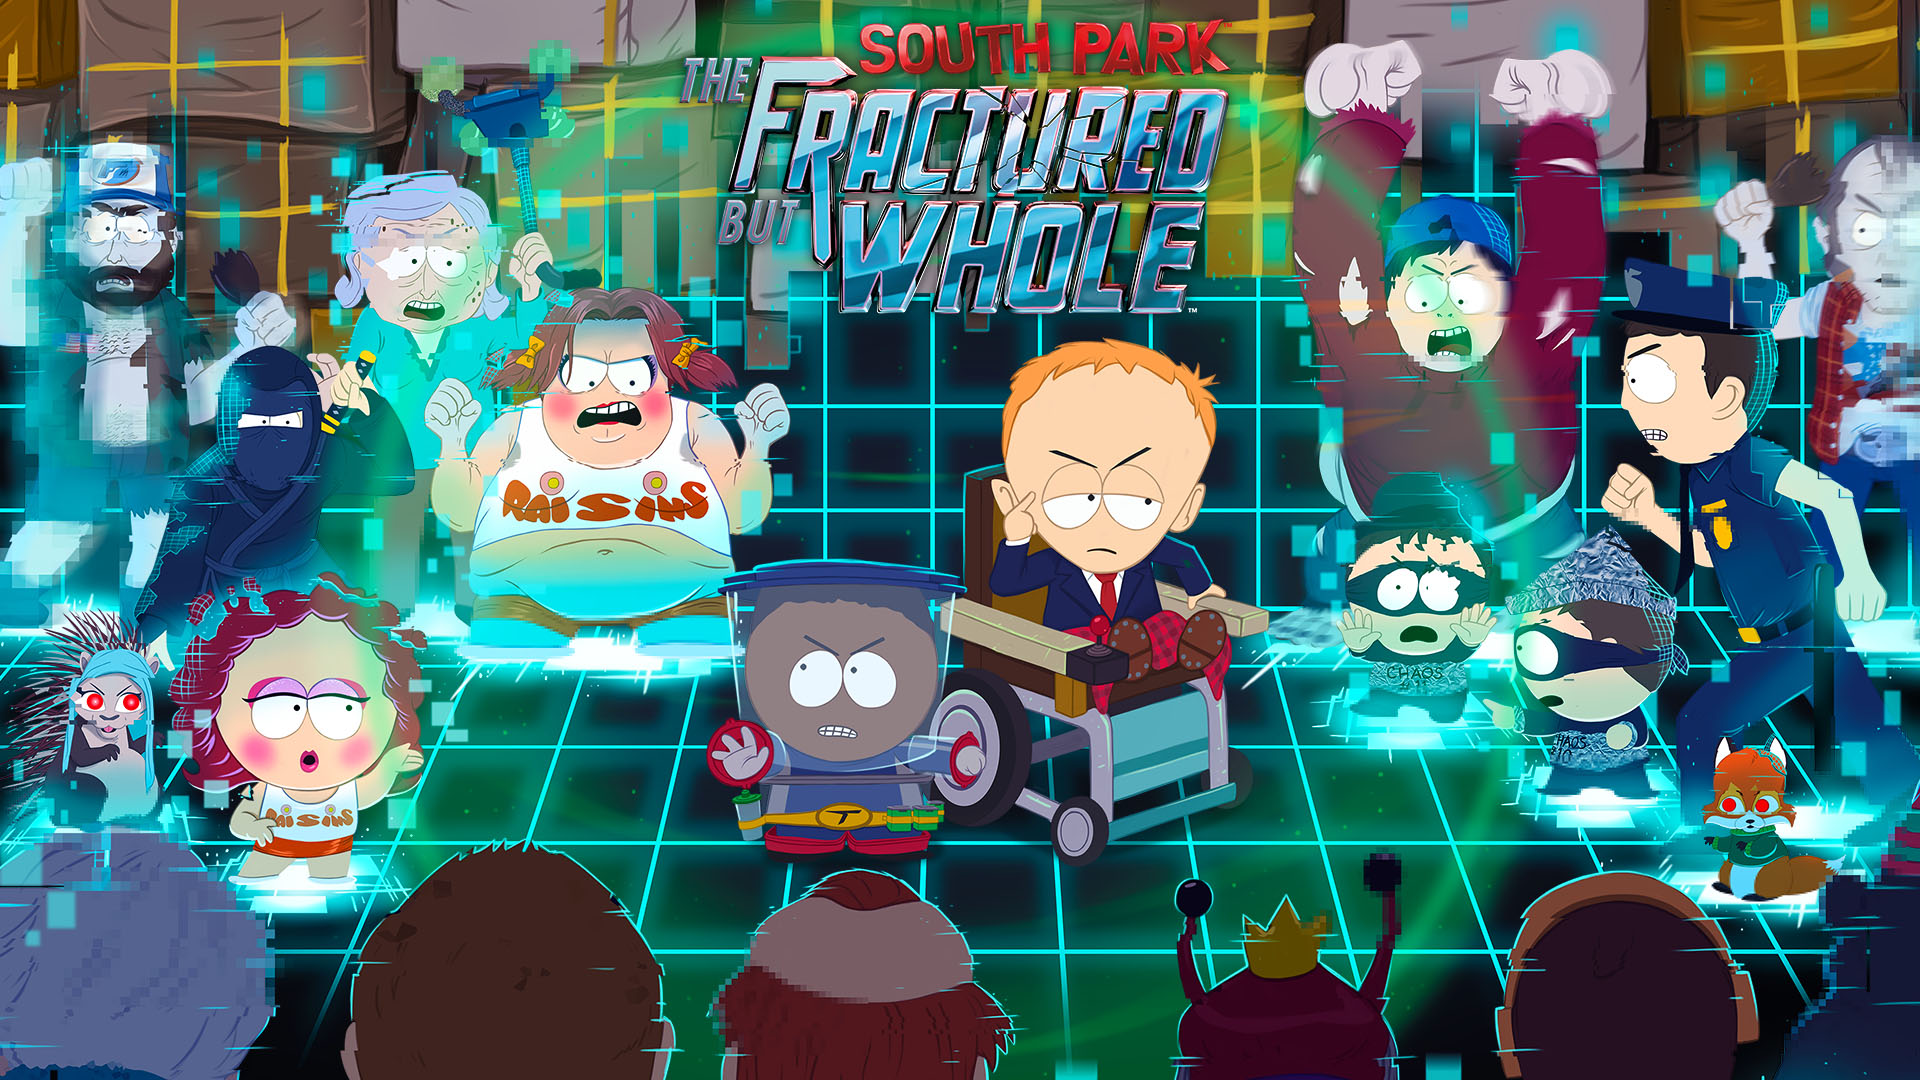 South park the fractured but whole купить ключ стим фото 67